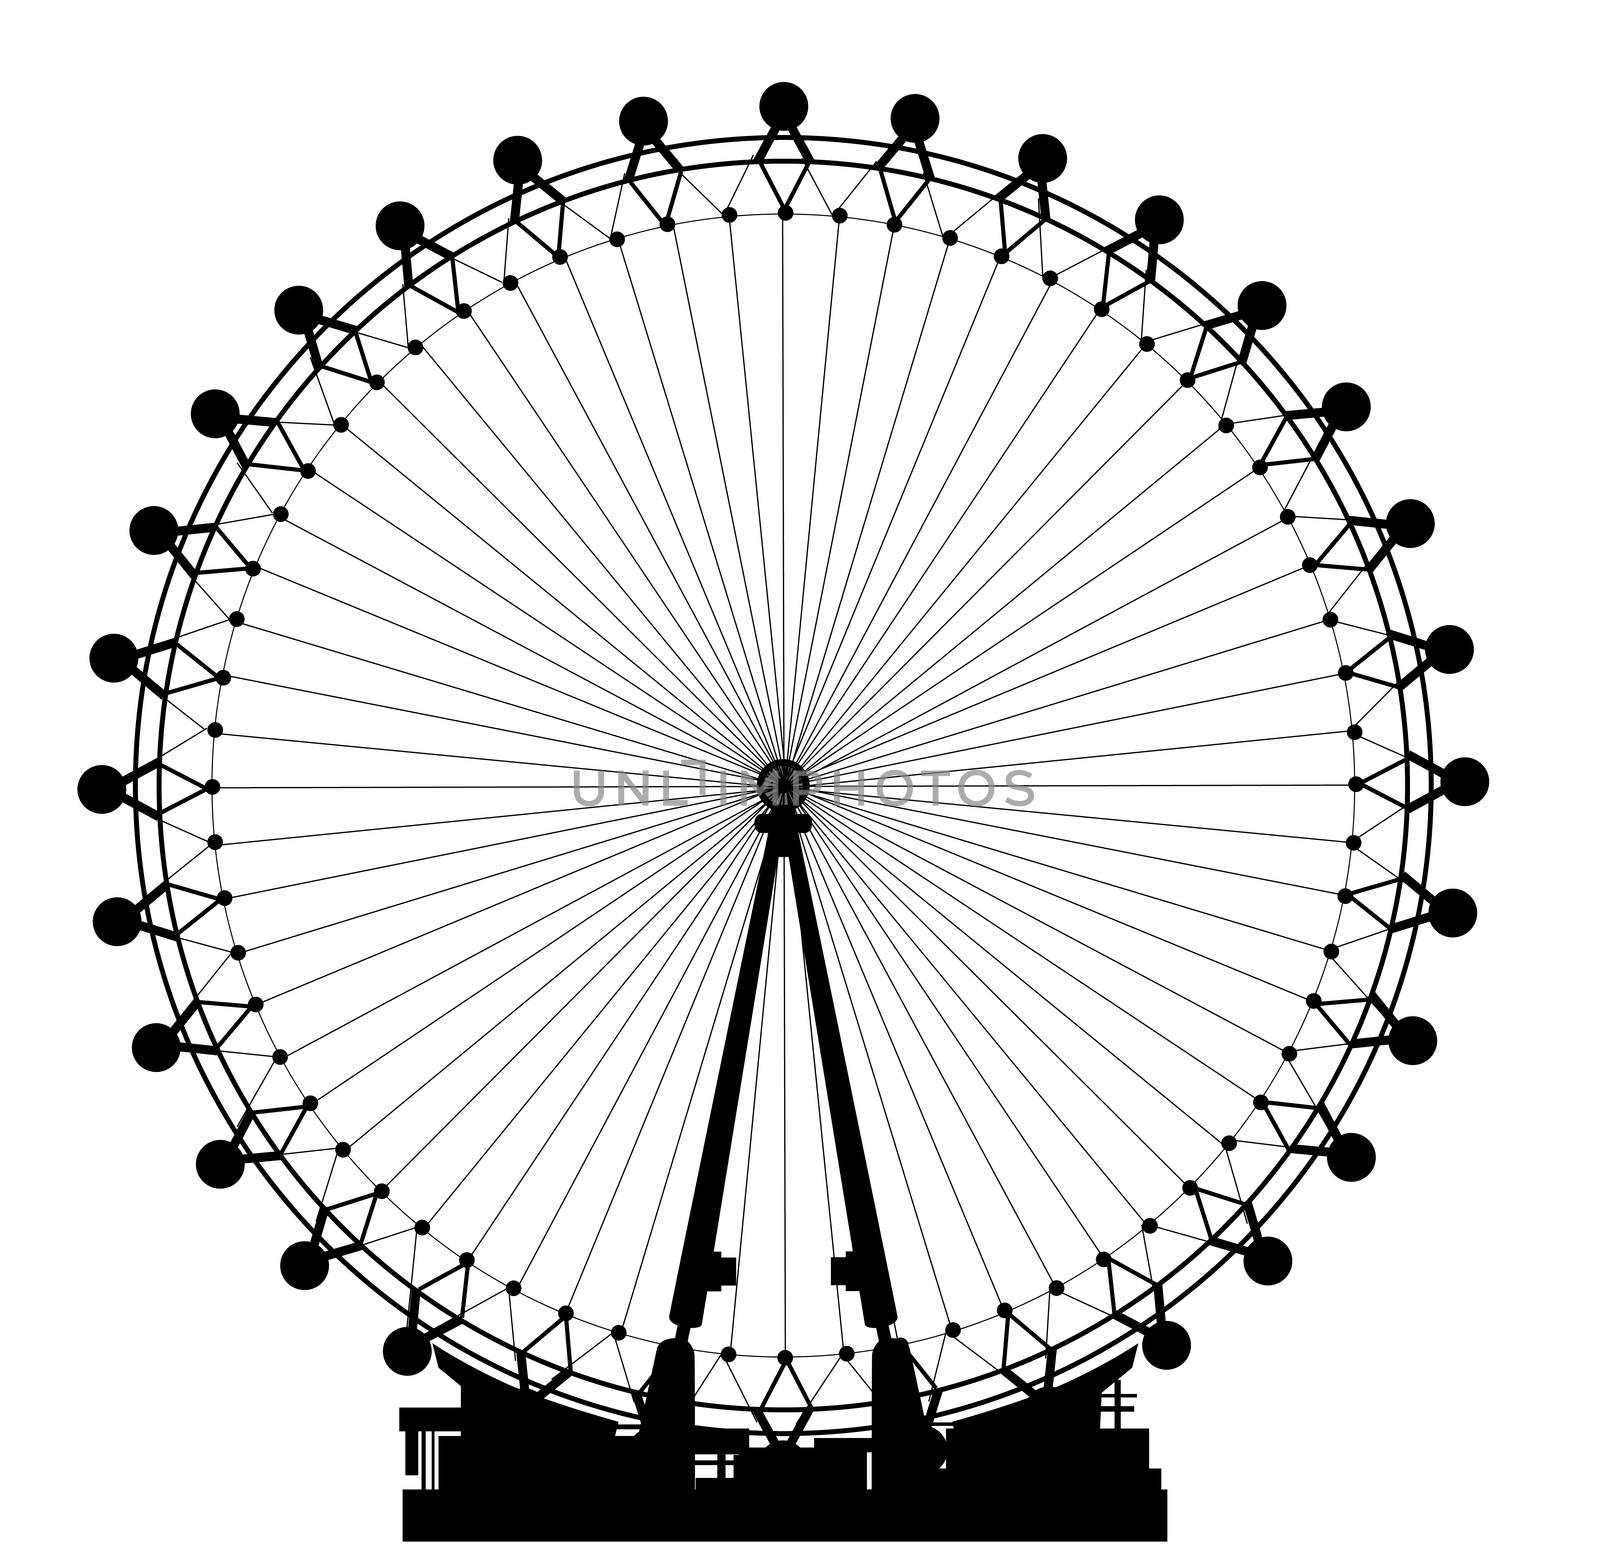 The London Eye big wheel in silhouette against a white background.